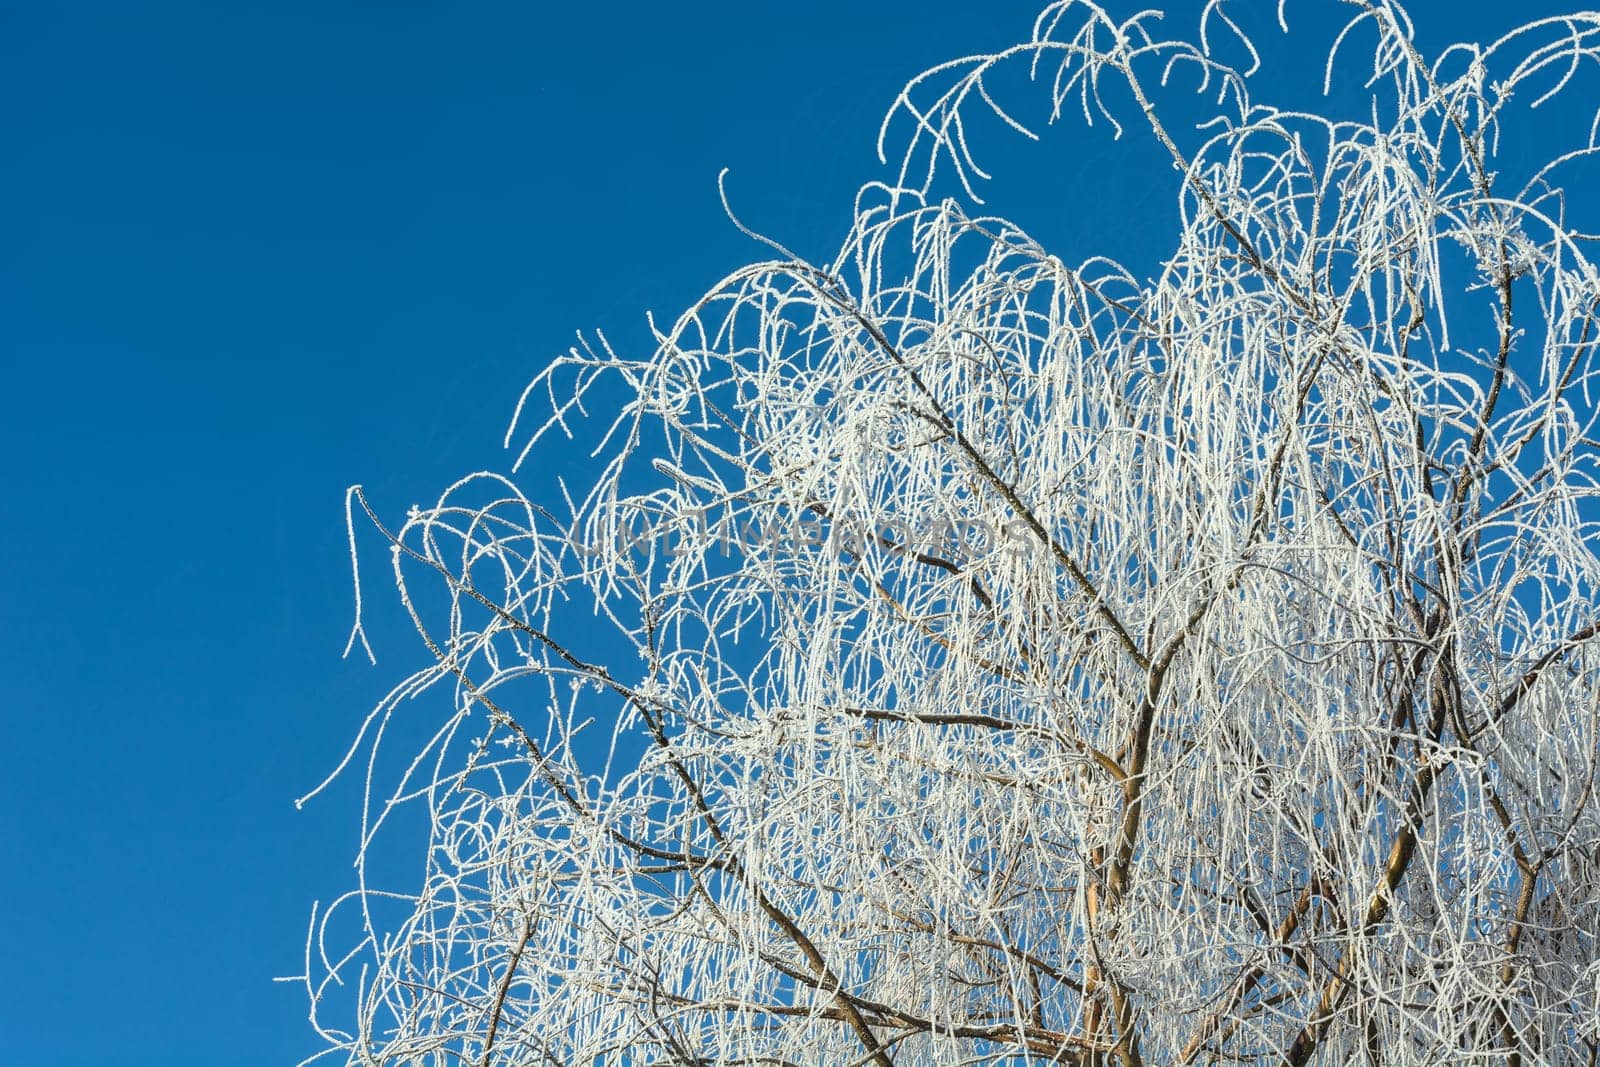 Frosted top tree branches and blue sky by darekb22